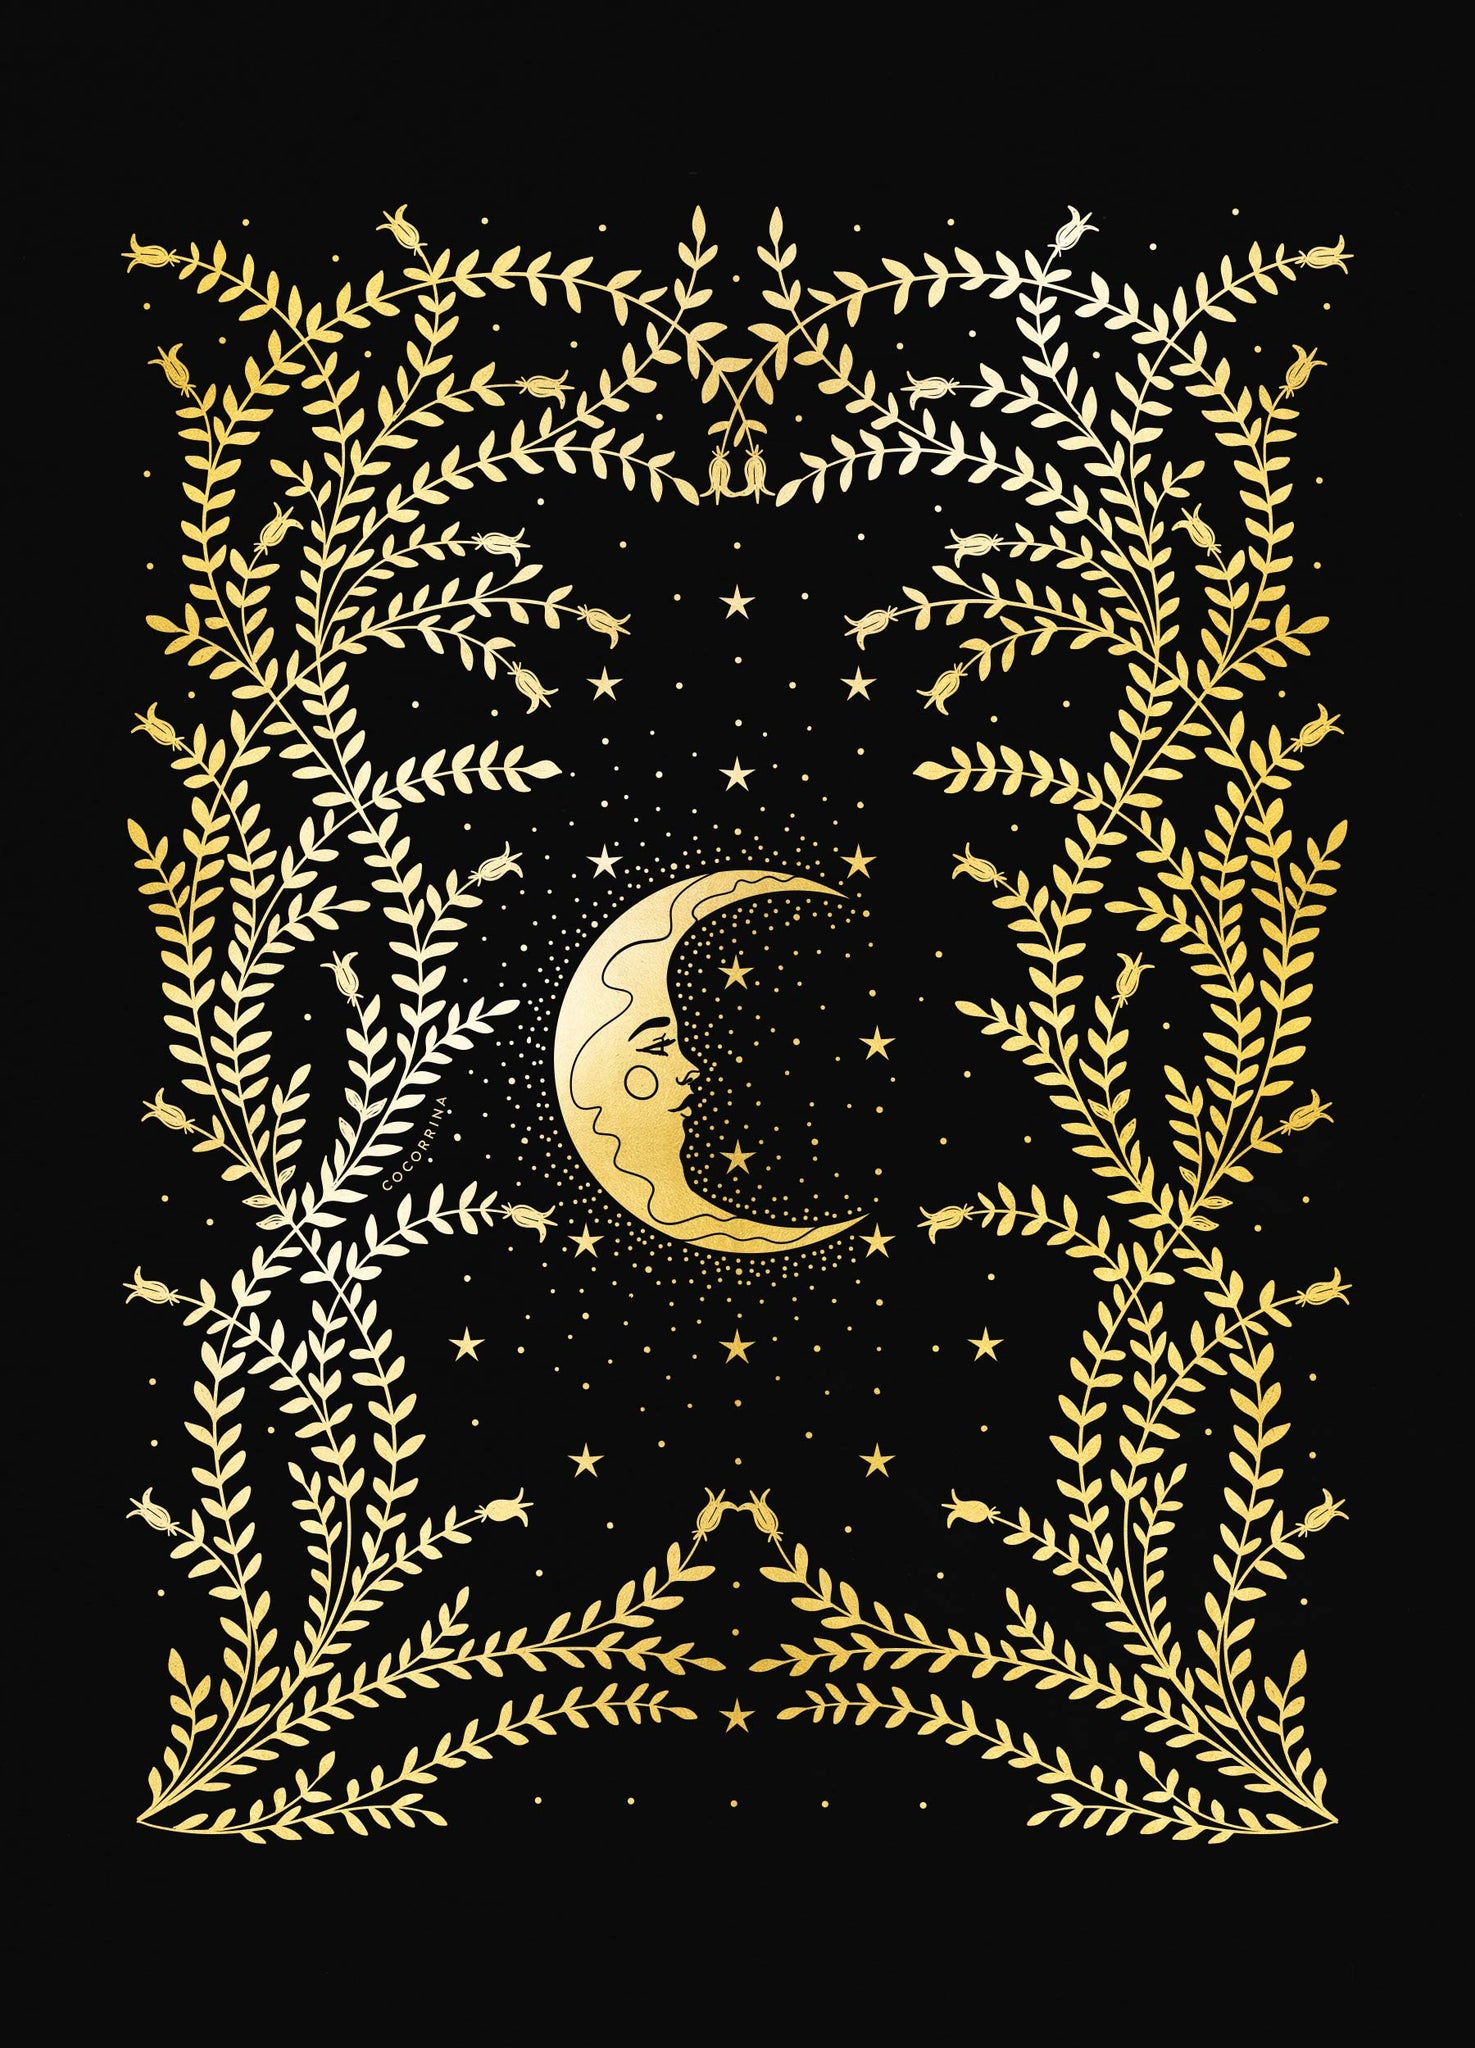 Night botanical forest gold foil art print on black paper by Cocorrina & Co